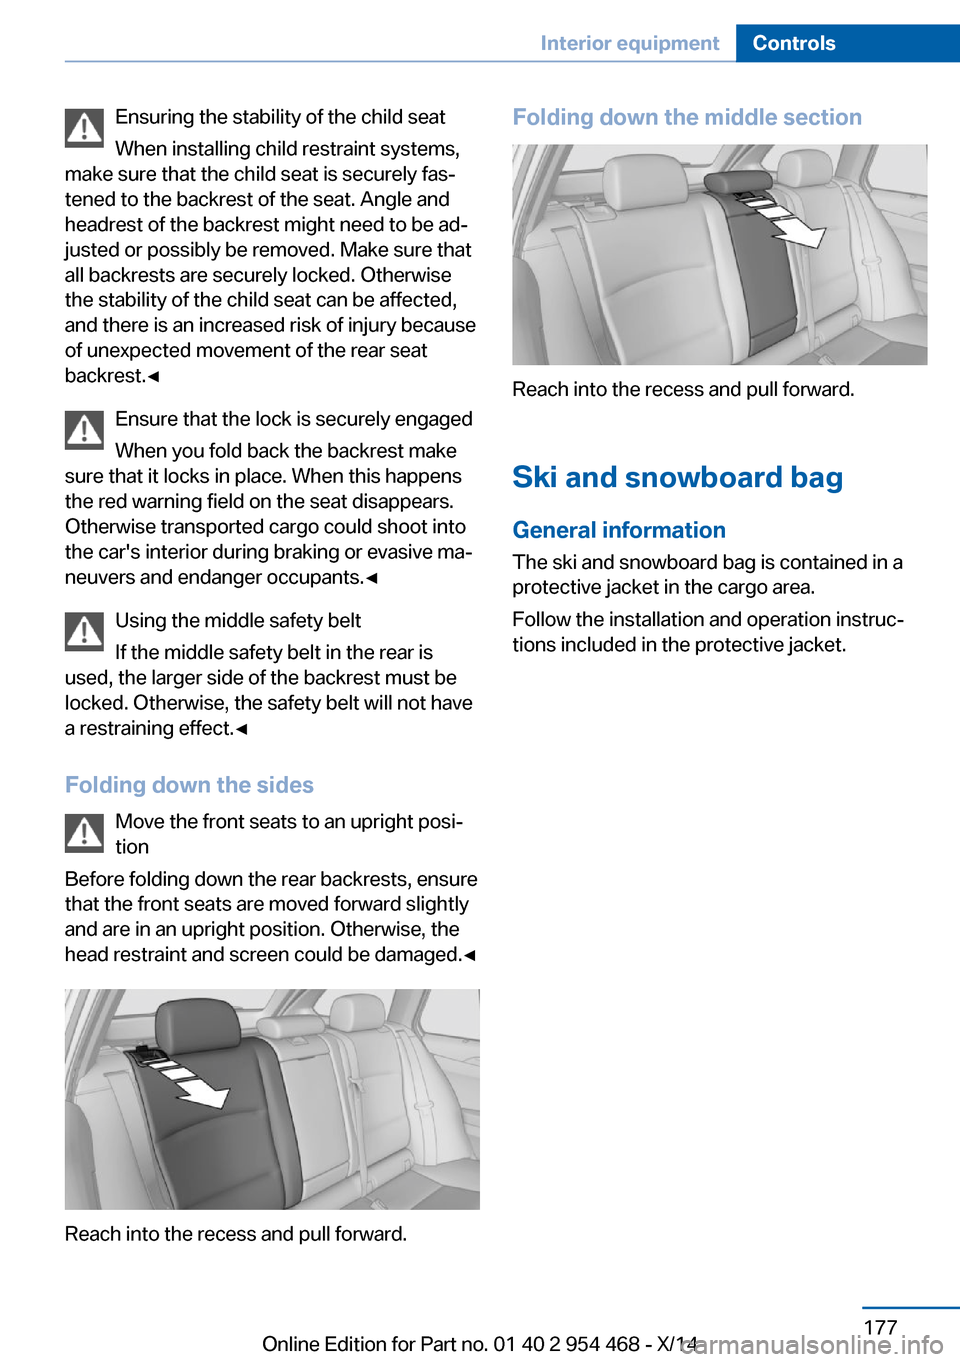 BMW X6 2014 F16 Owners Manual Ensuring the stability of the child seat
When installing child restraint systems,
make sure that the child seat is securely fas‐
tened to the backrest of the seat. Angle and
headrest of the backrest